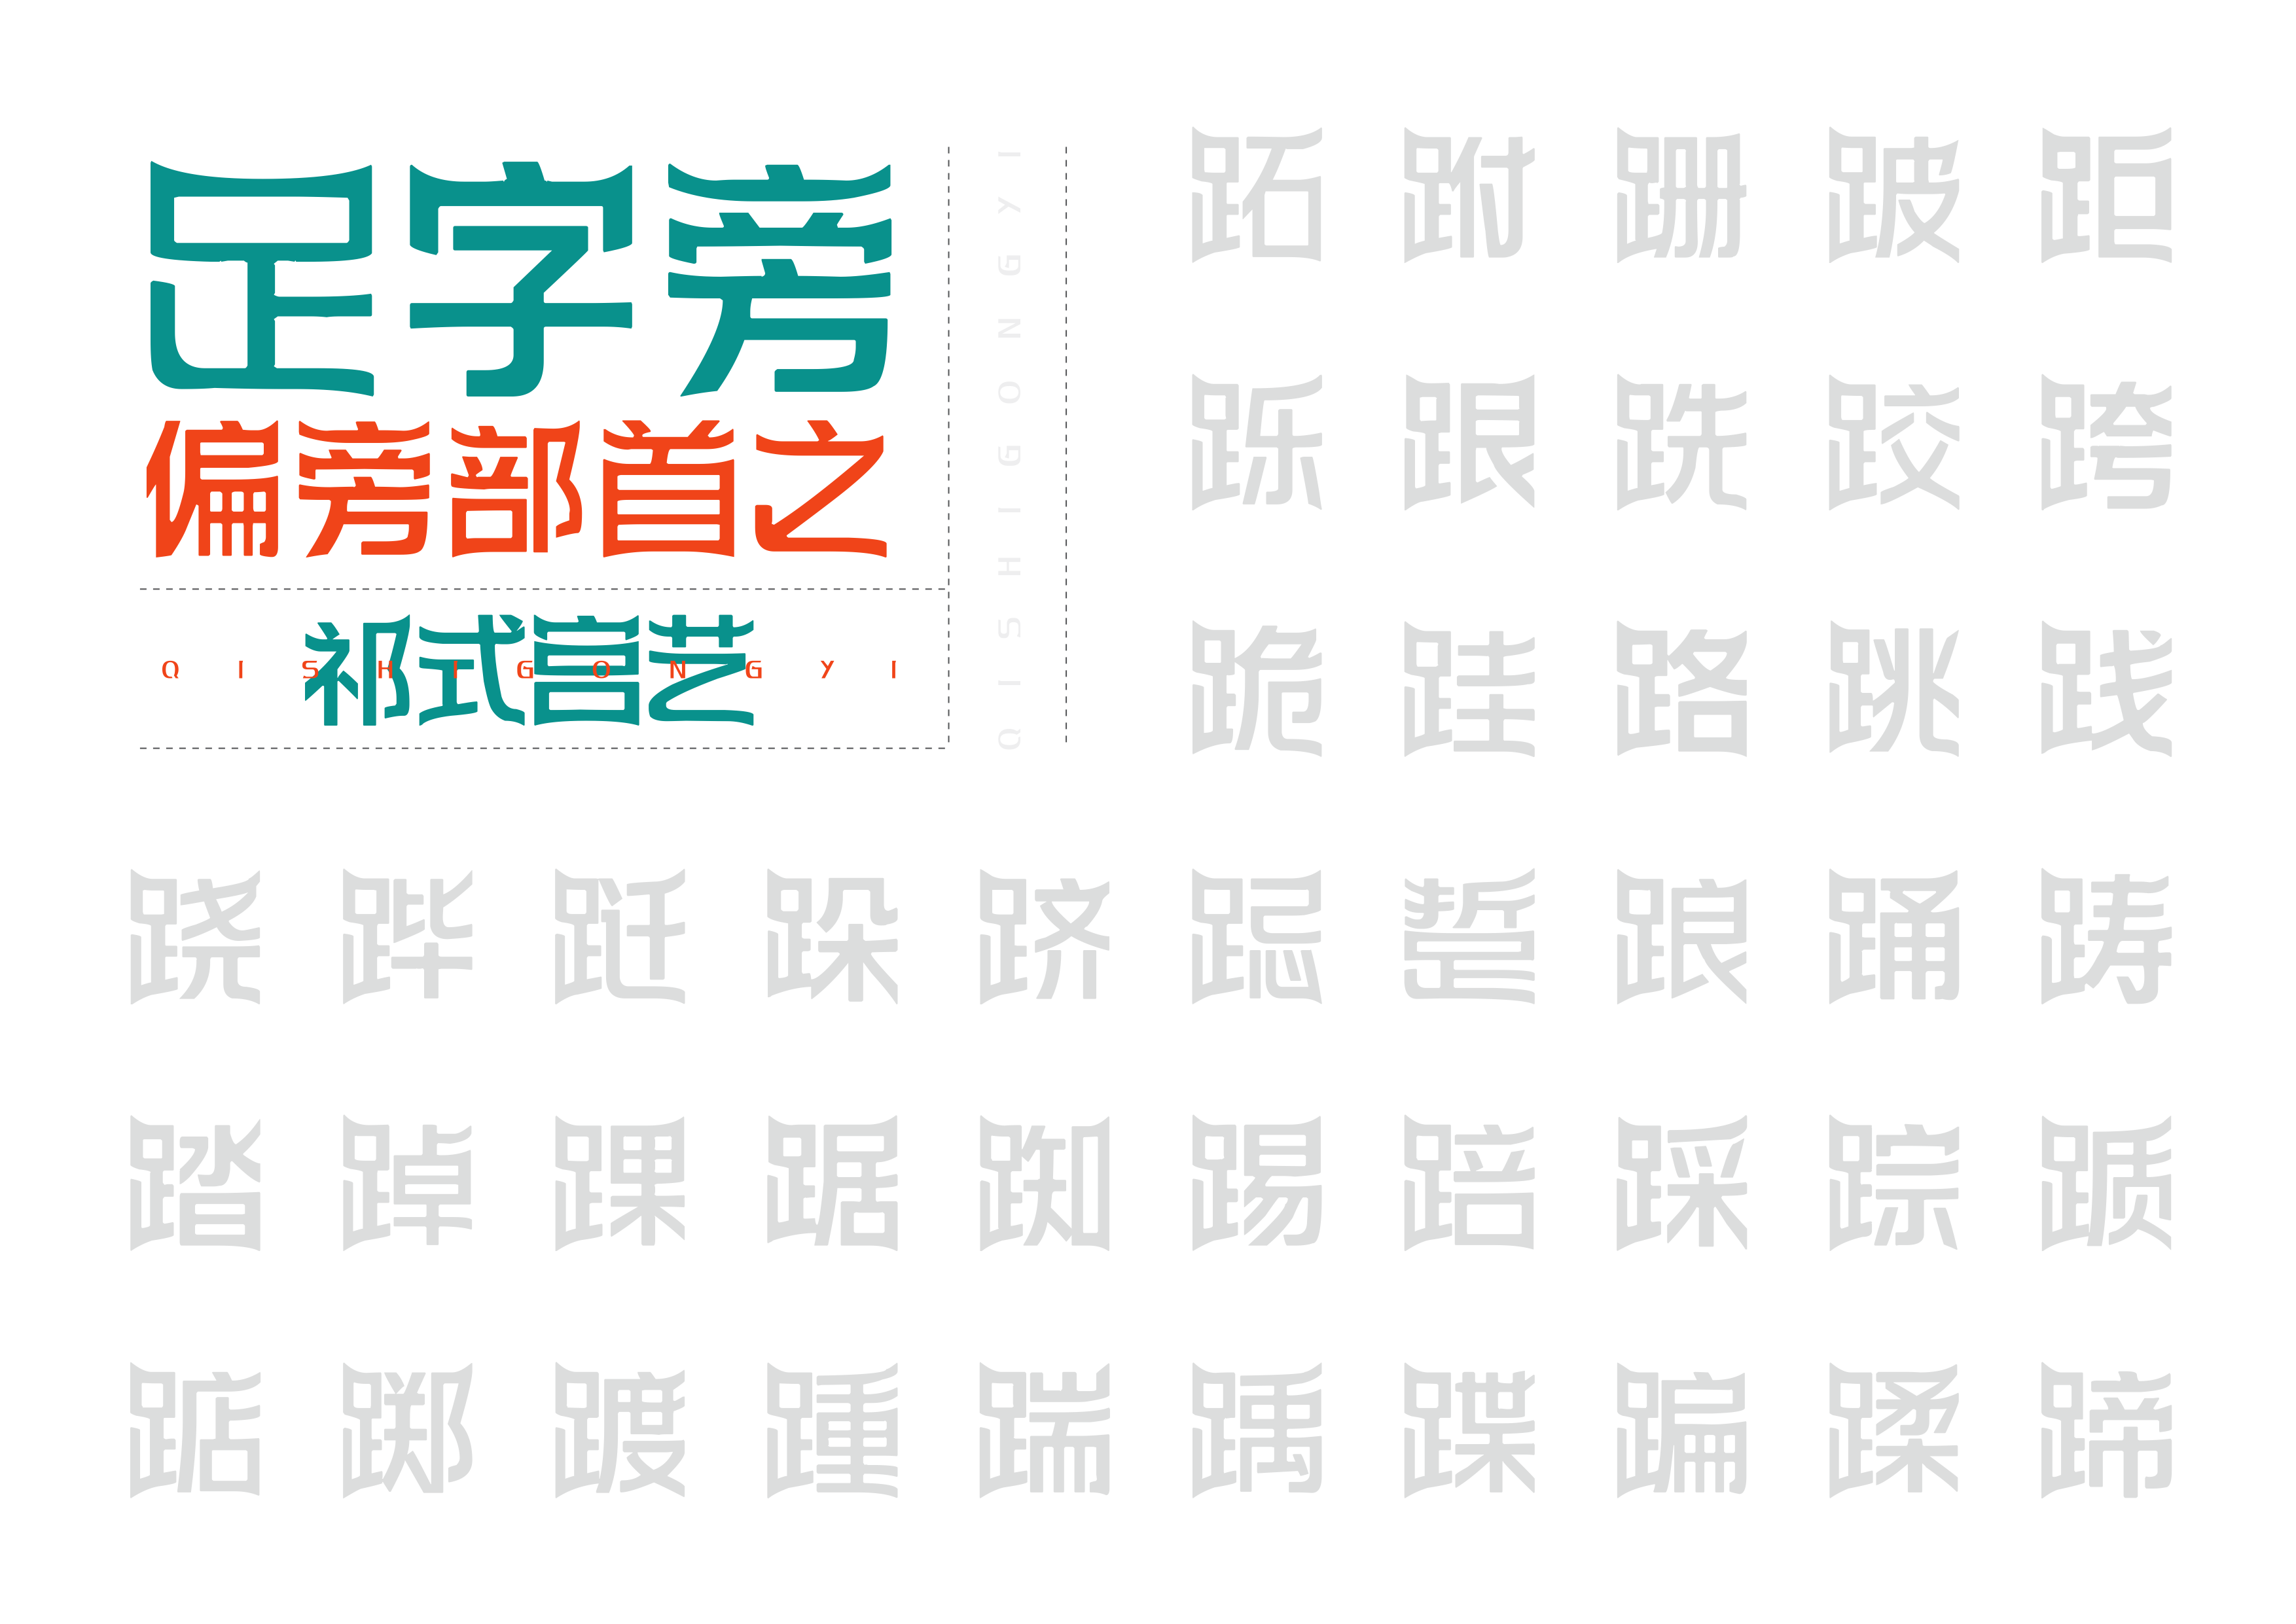 41P Collection of the latest Chinese font design schemes in 2021 #.37